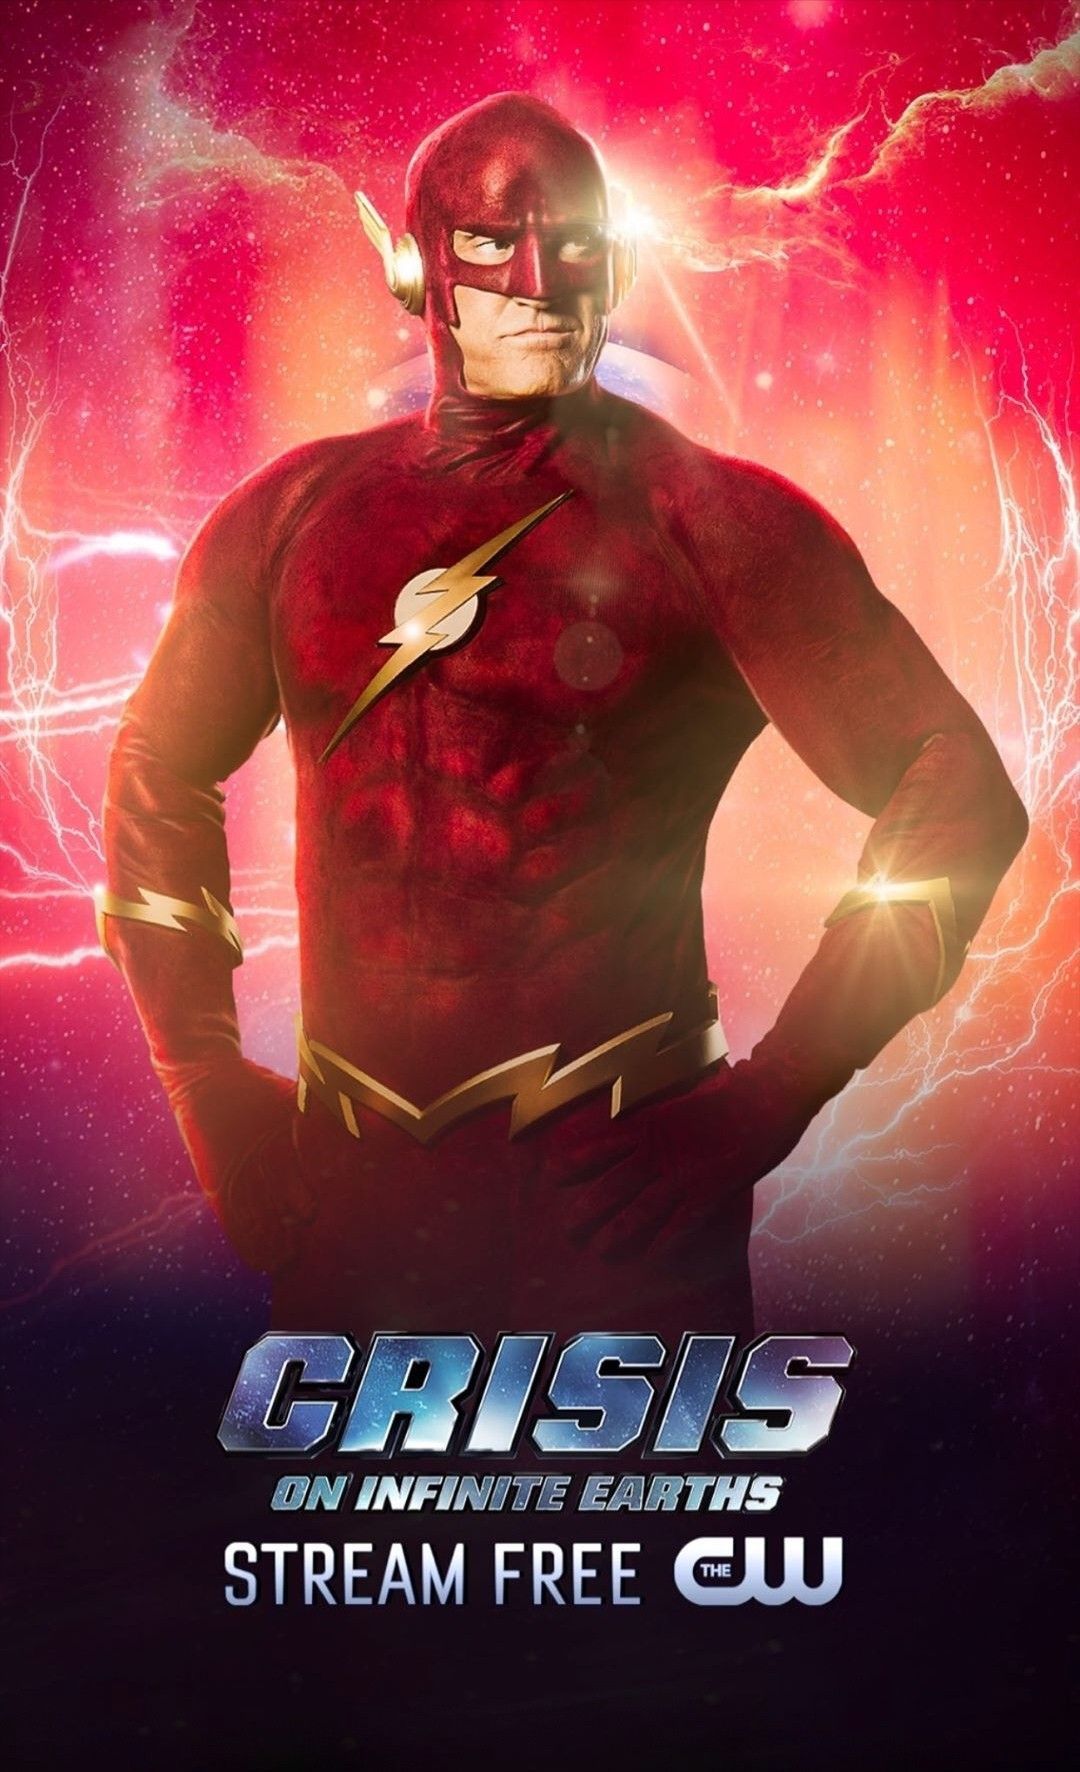 Pin By Steffen On Supergirl Arrow The Flash Legends Of Tomorrow Crises On Earth X Crises On Infinity Earths. Infinite Earths, Superhero Shows, Flash Tv Series